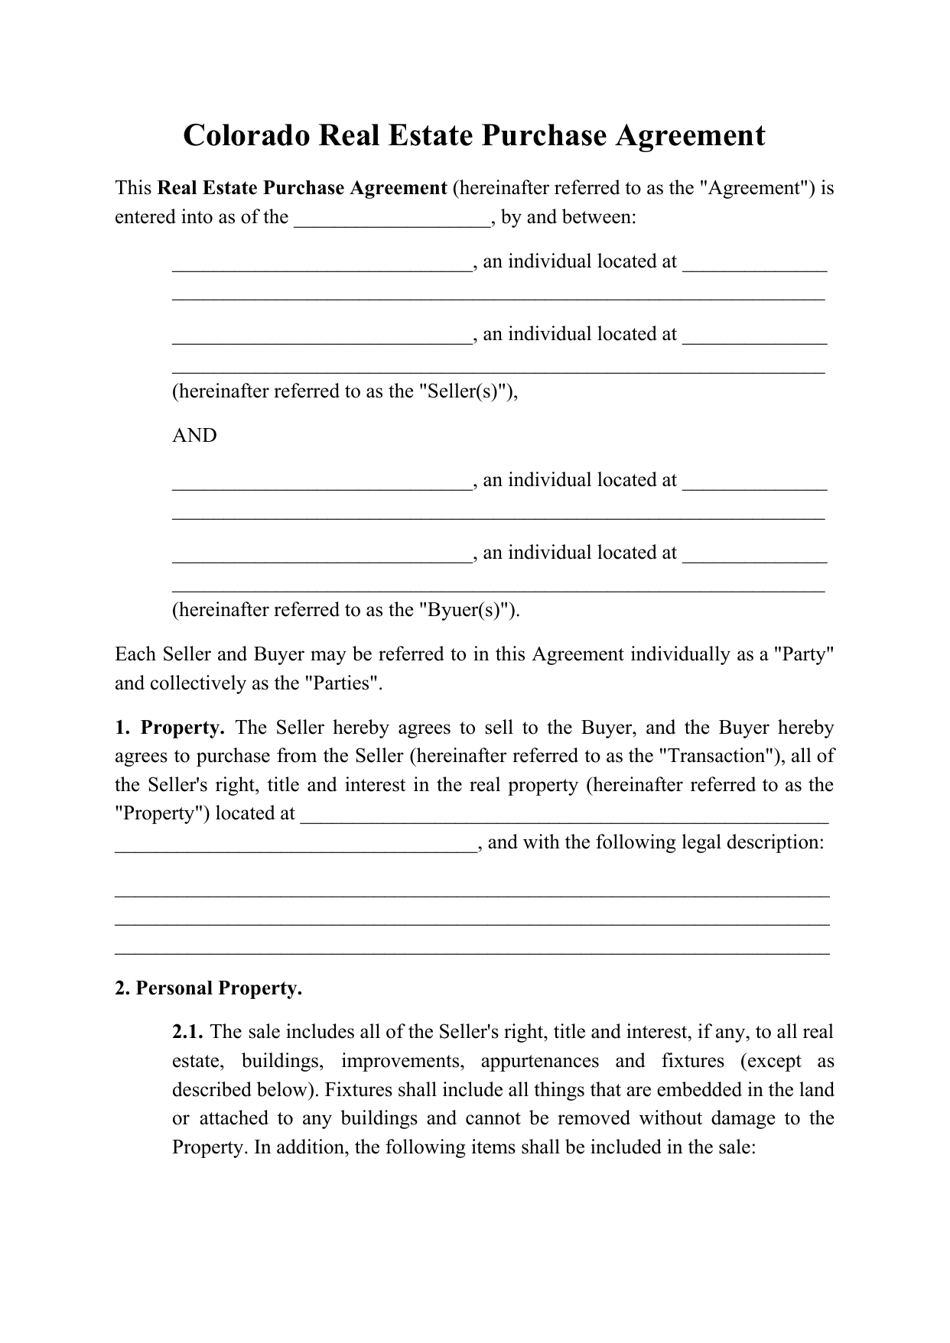 colorado-real-estate-purchase-agreement-template-fill-out-sign-online-and-download-pdf